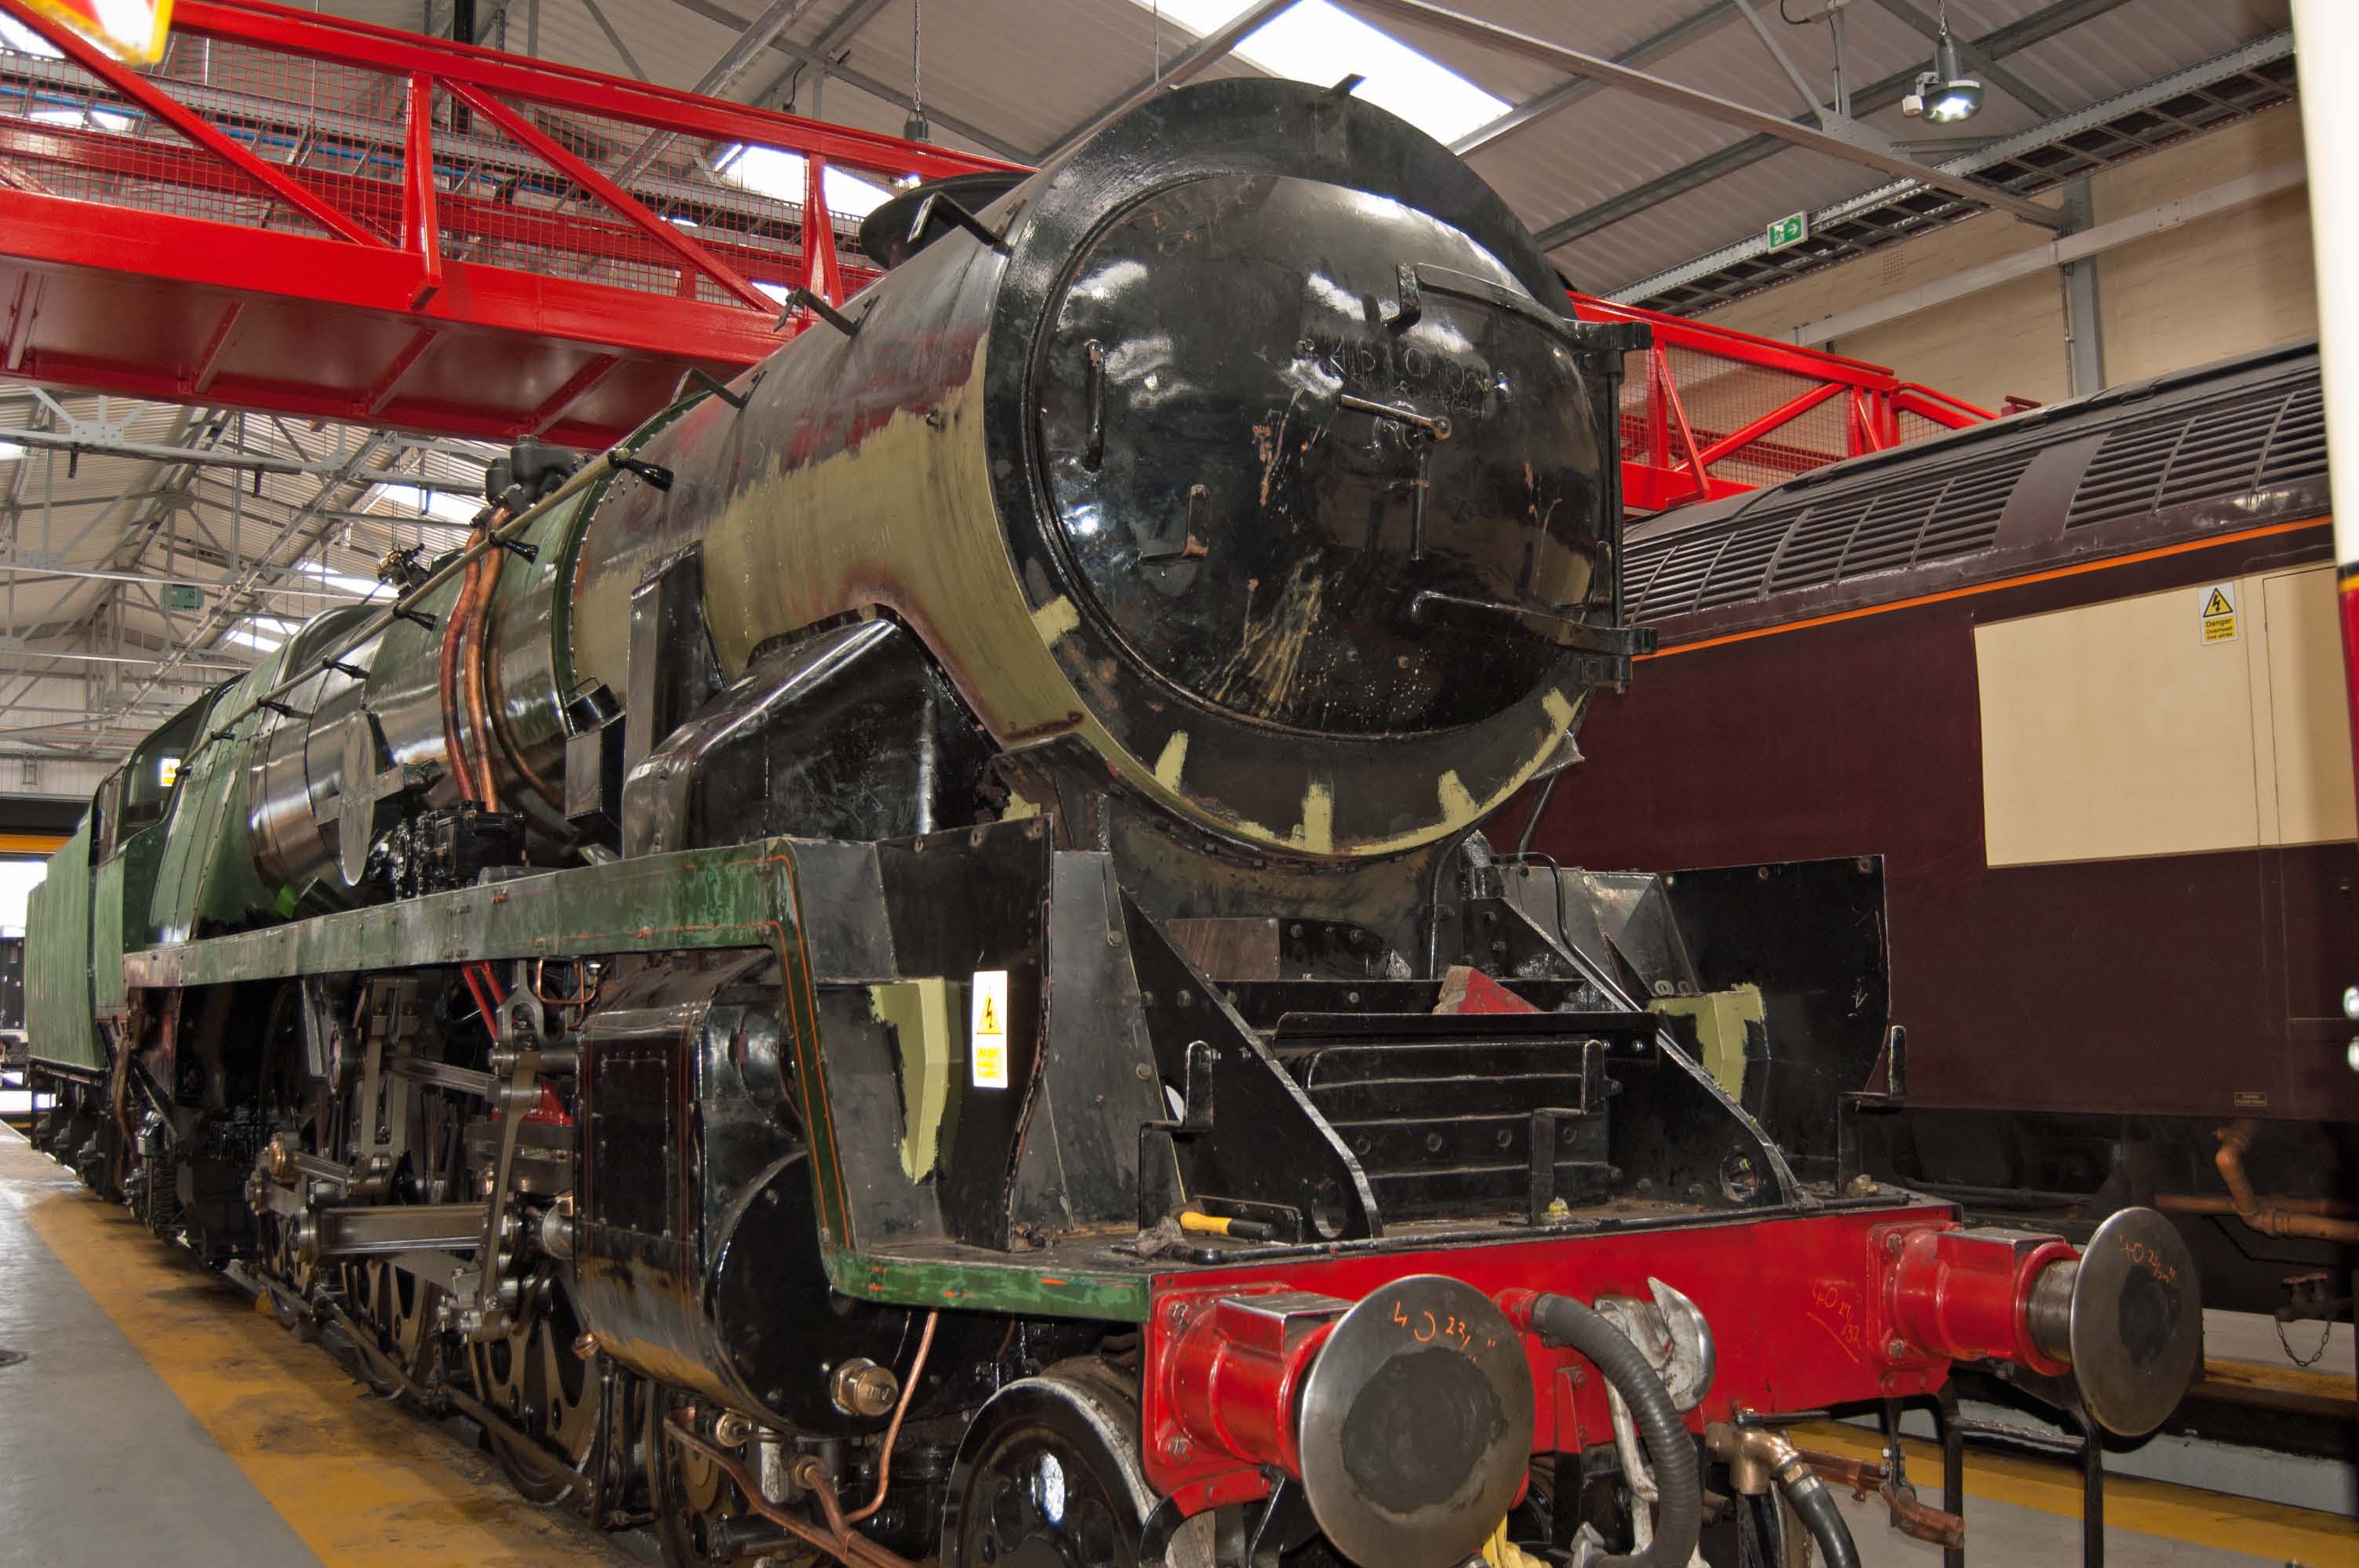 The loco has been moved, prior to weighing